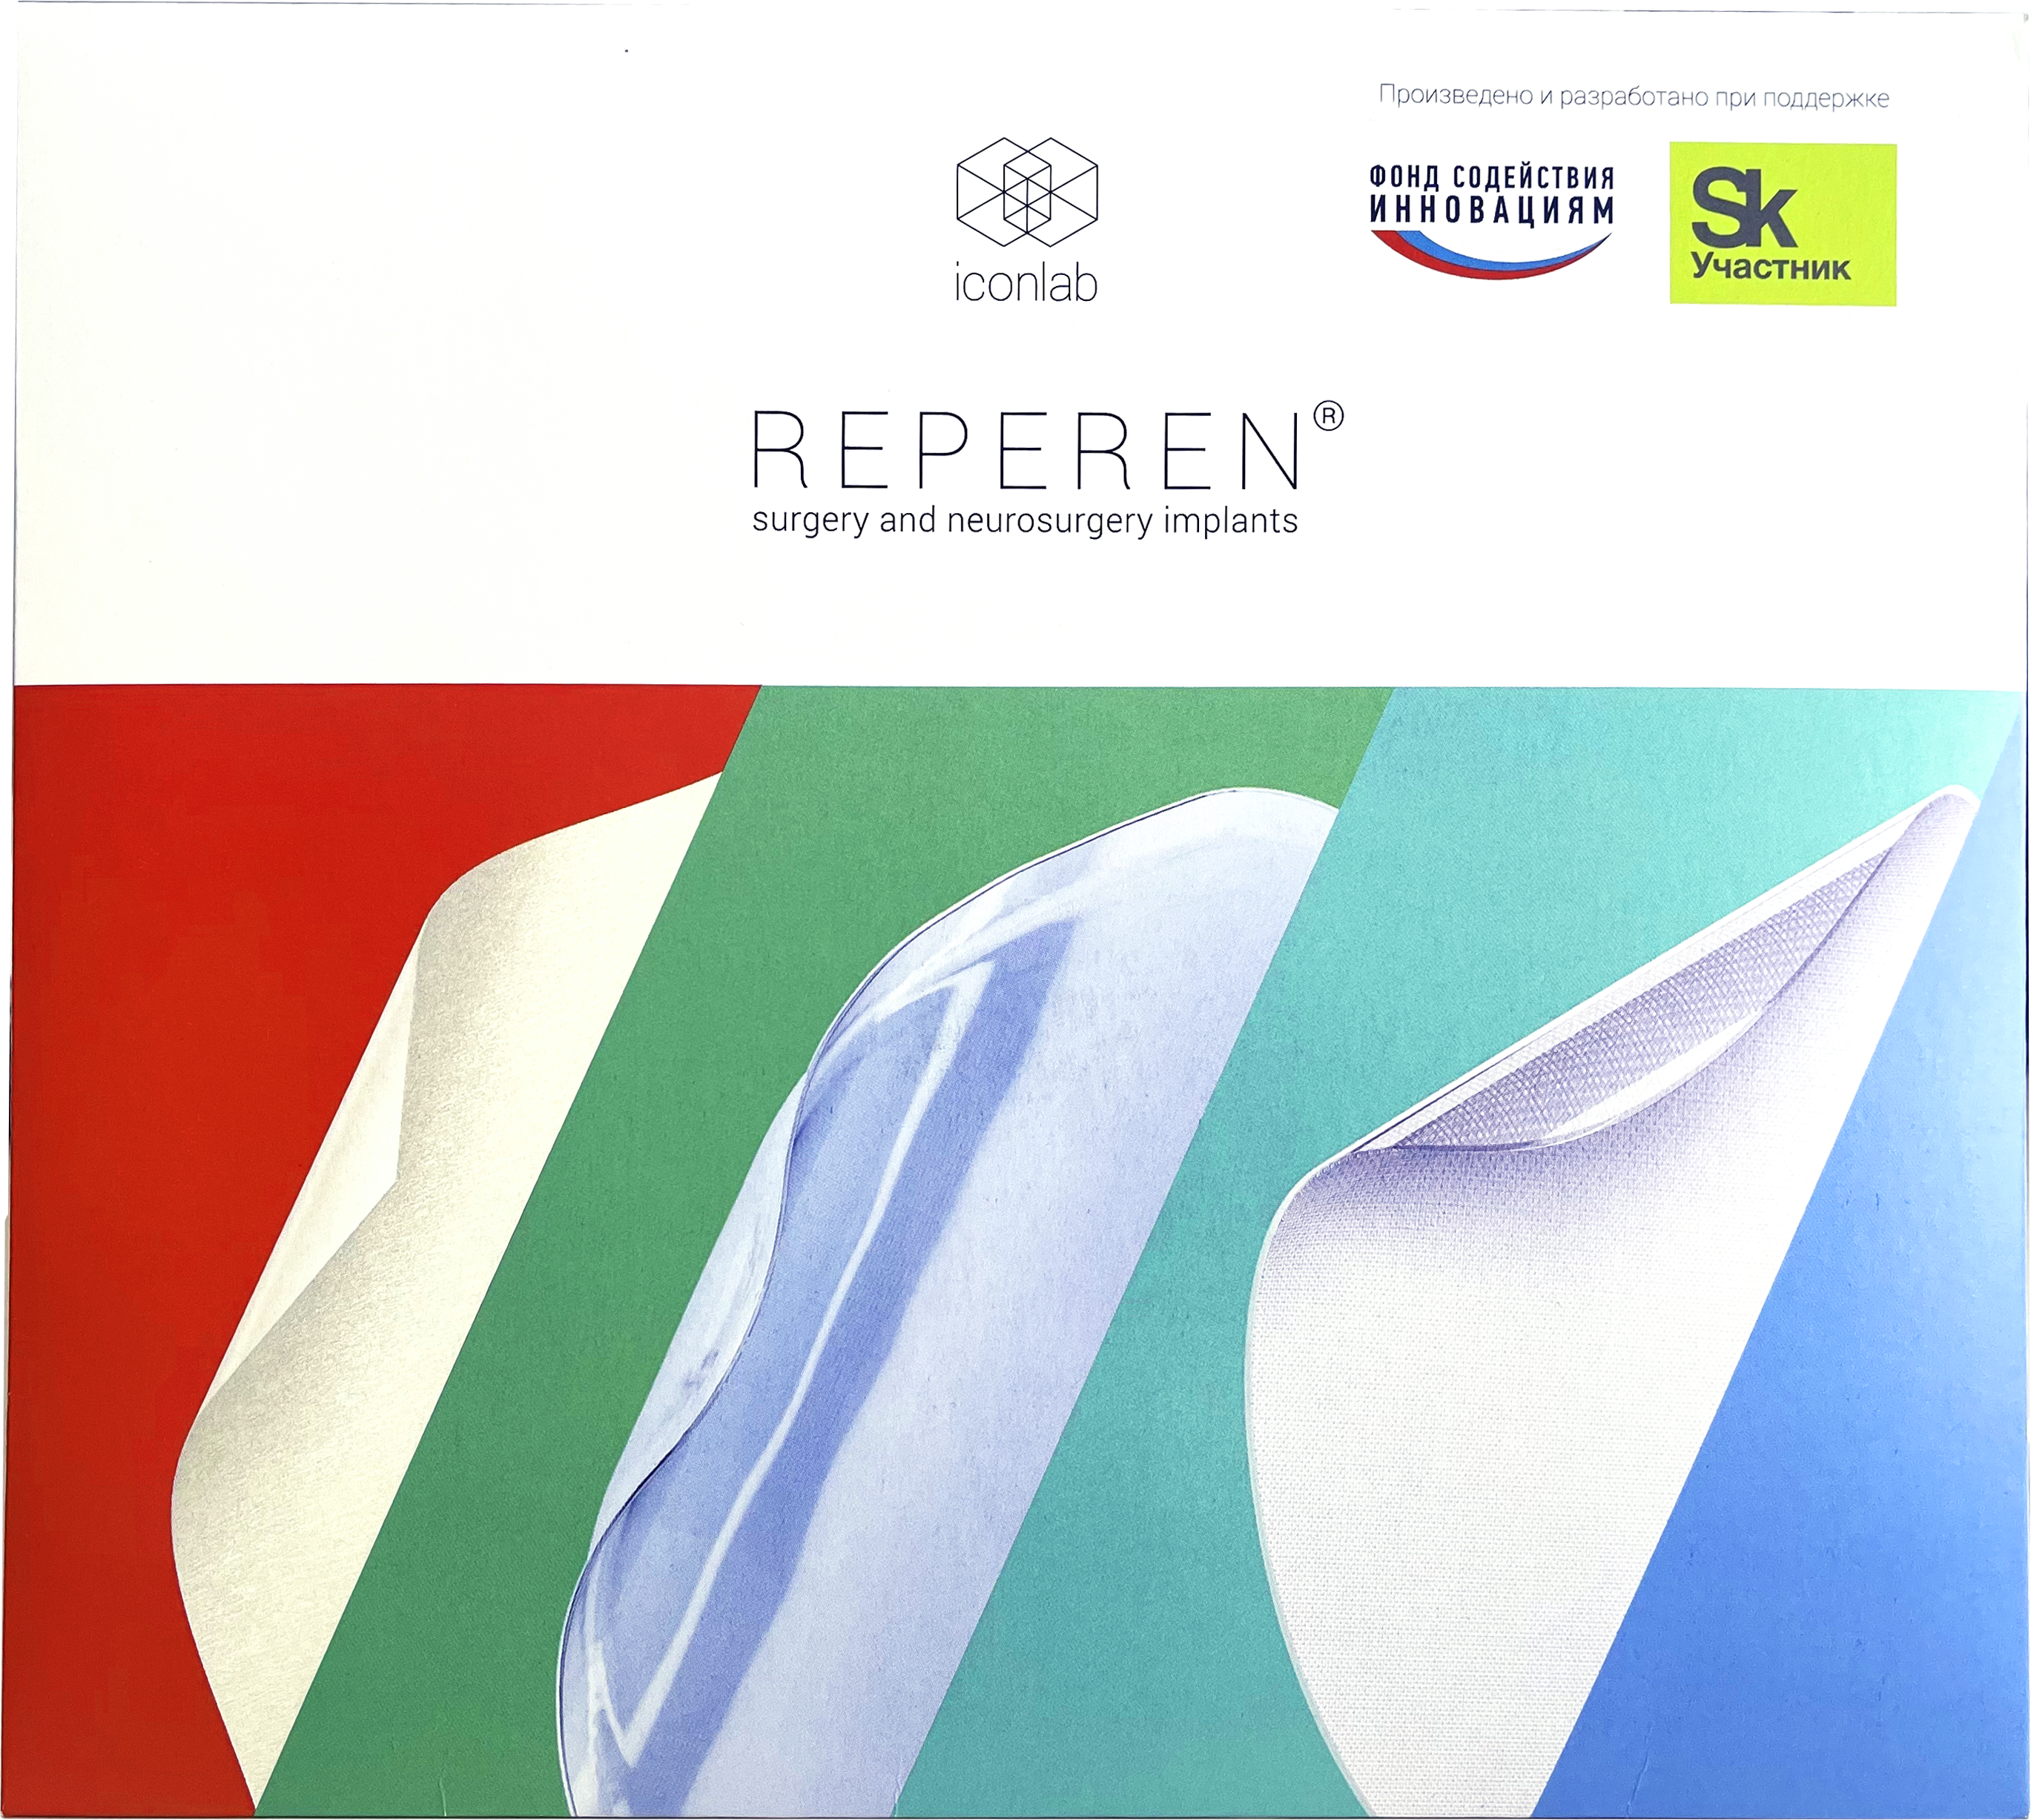 REPEREN-17 Endoprostheses for ventral and umbilical hernia repair